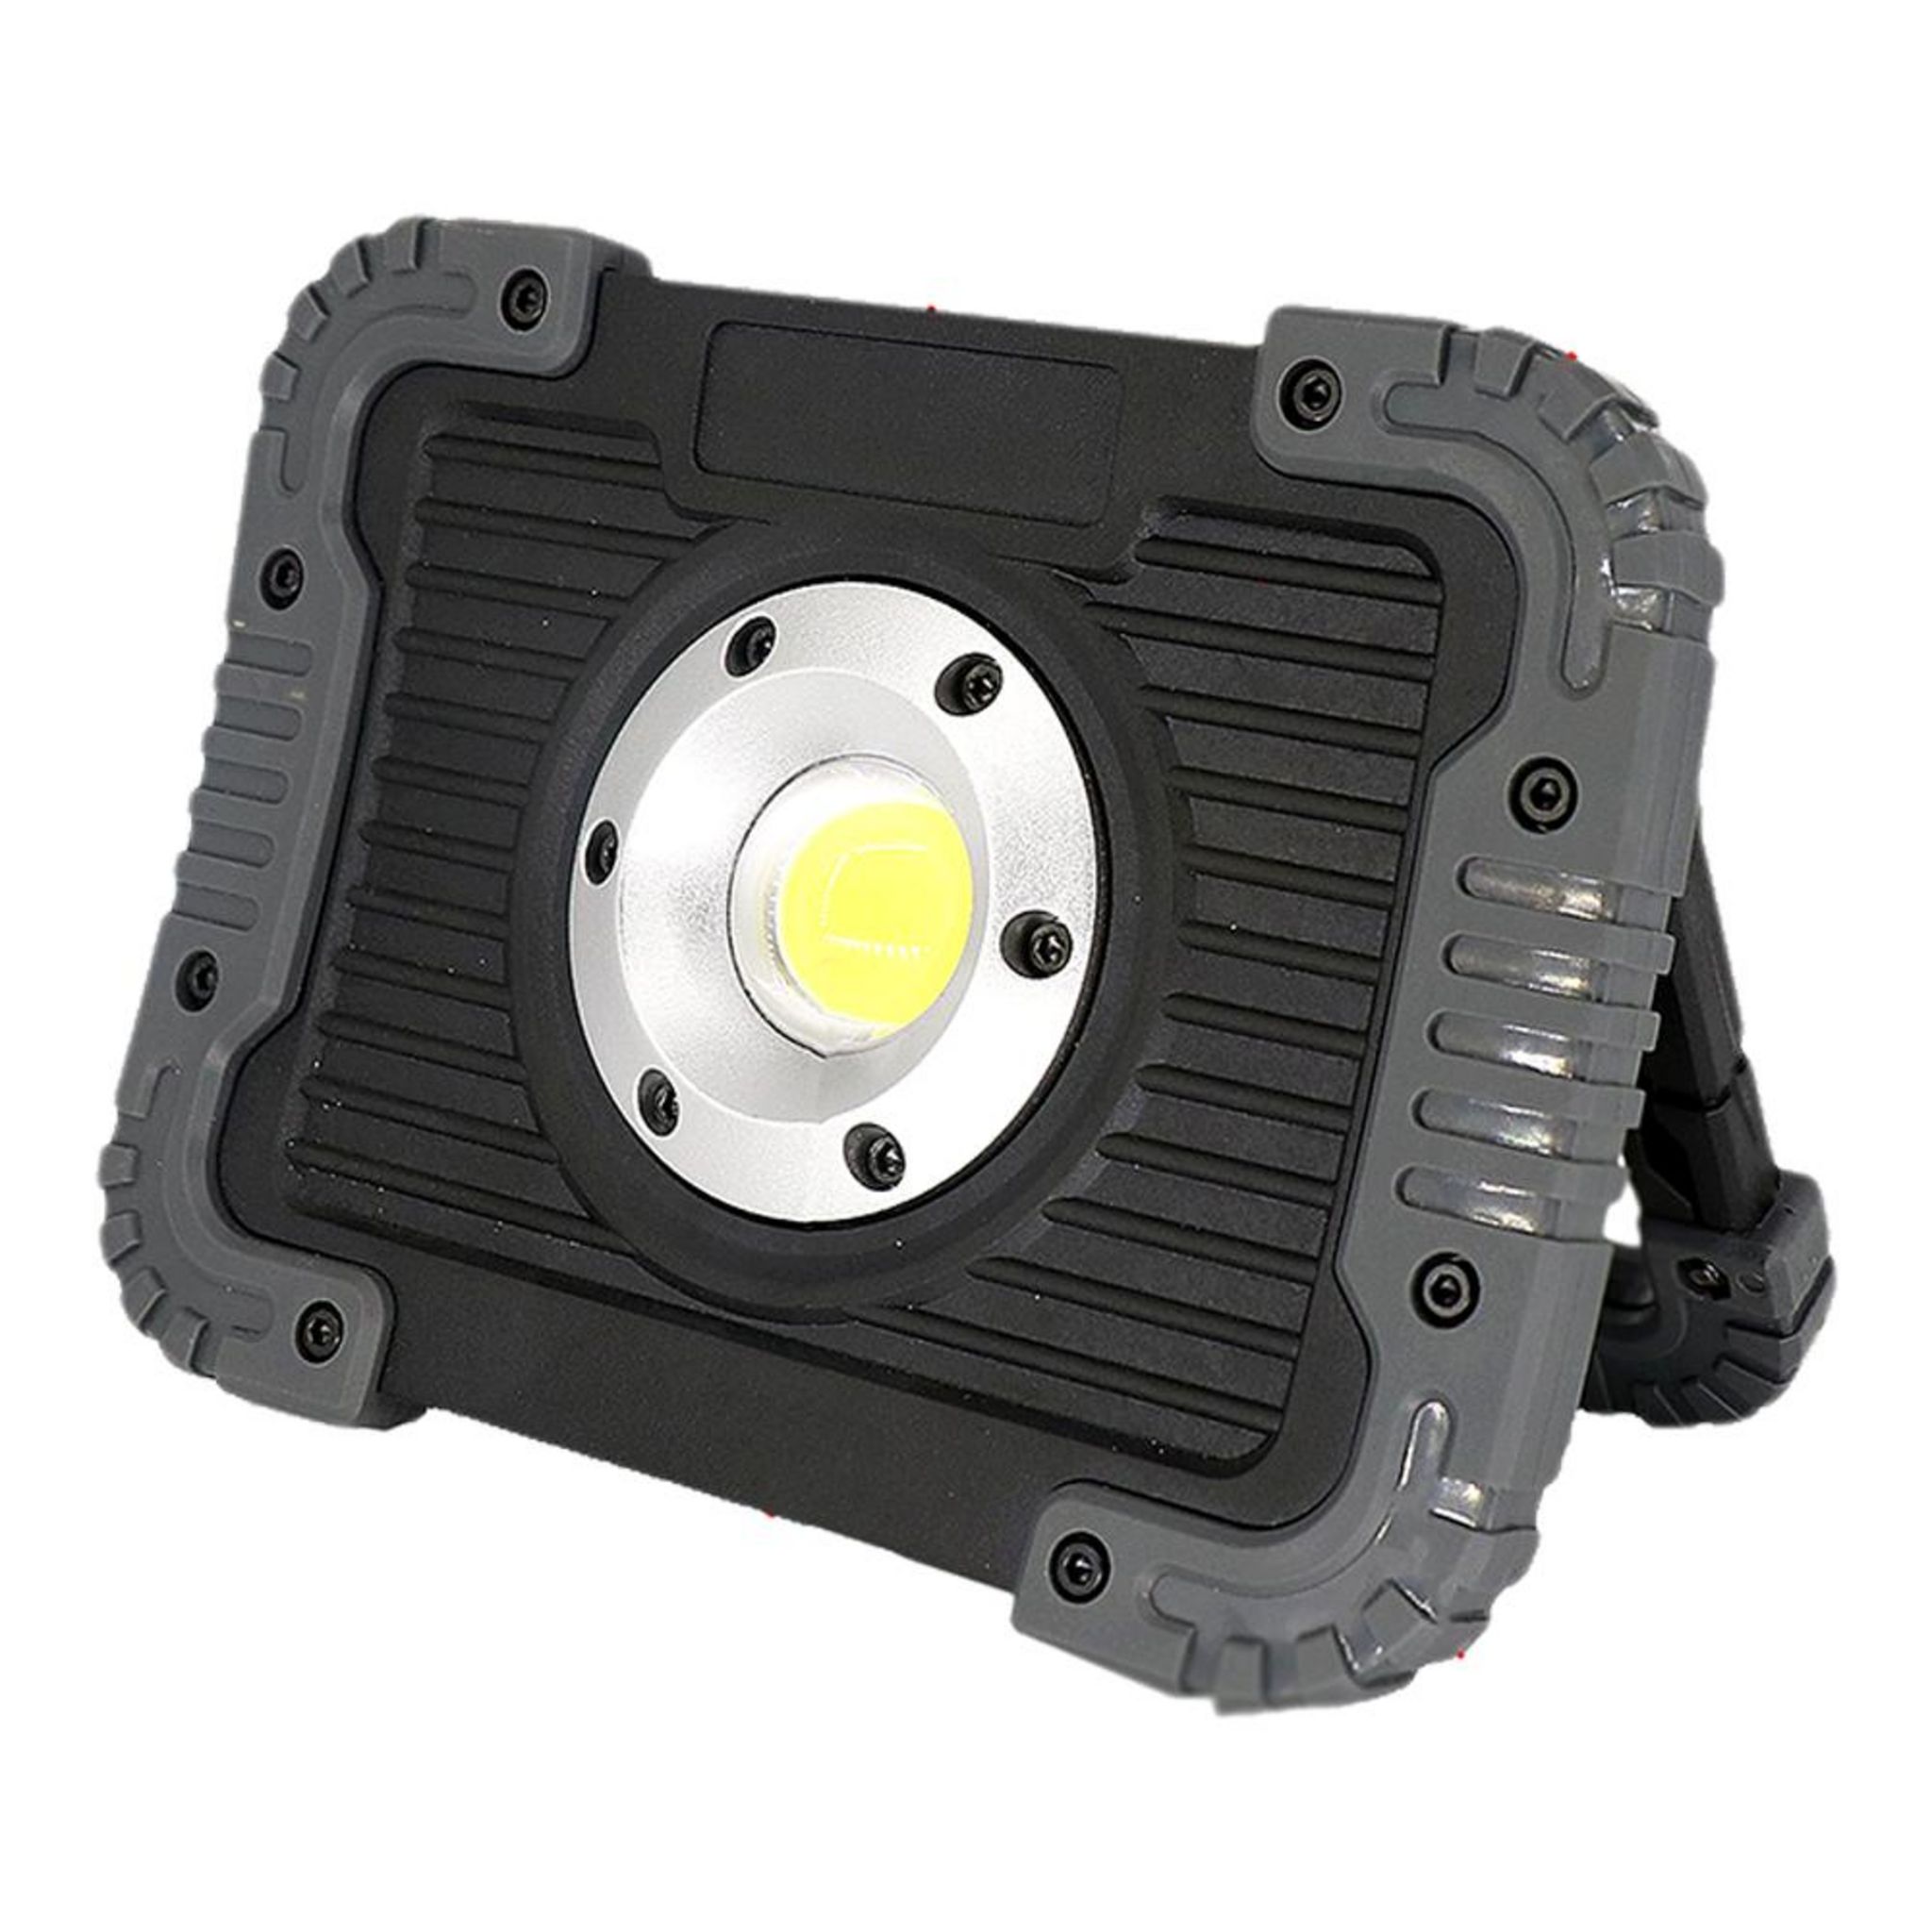 Lampe frontale LED COB > Foxlight